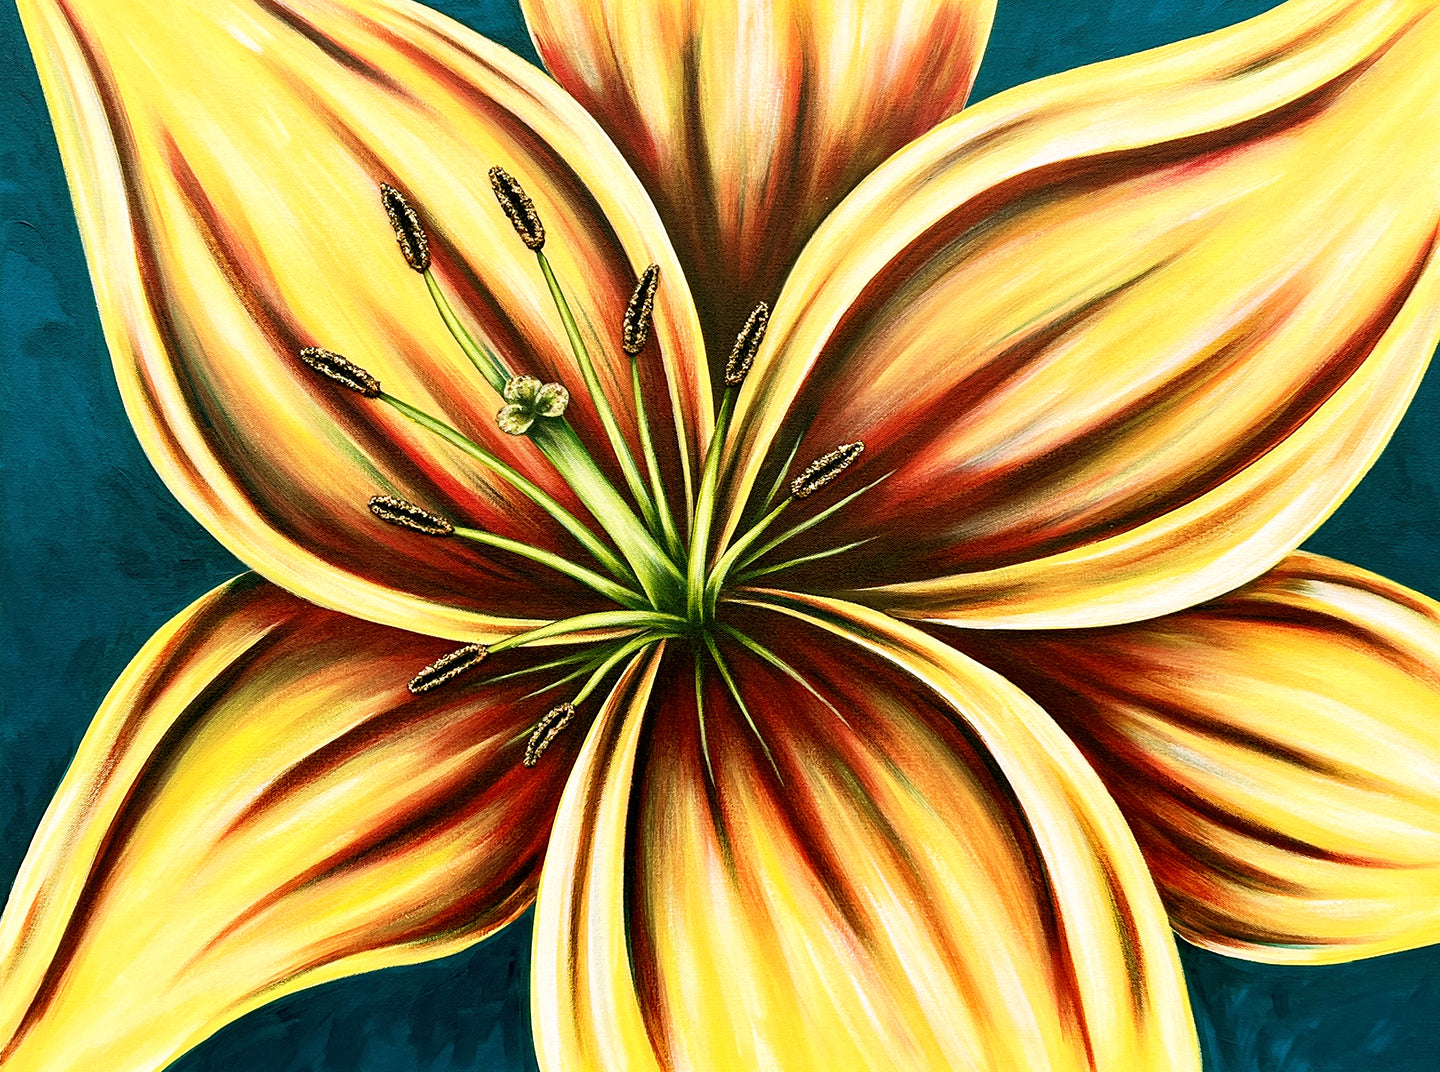 Contemporary floral painting by Denise Cassidy Wood of Northville, Mich.  30 x 40 x 1.5 in.  Original, artist-signed, acrylic and mixed-media on gallery-wrapped canvas painting. 